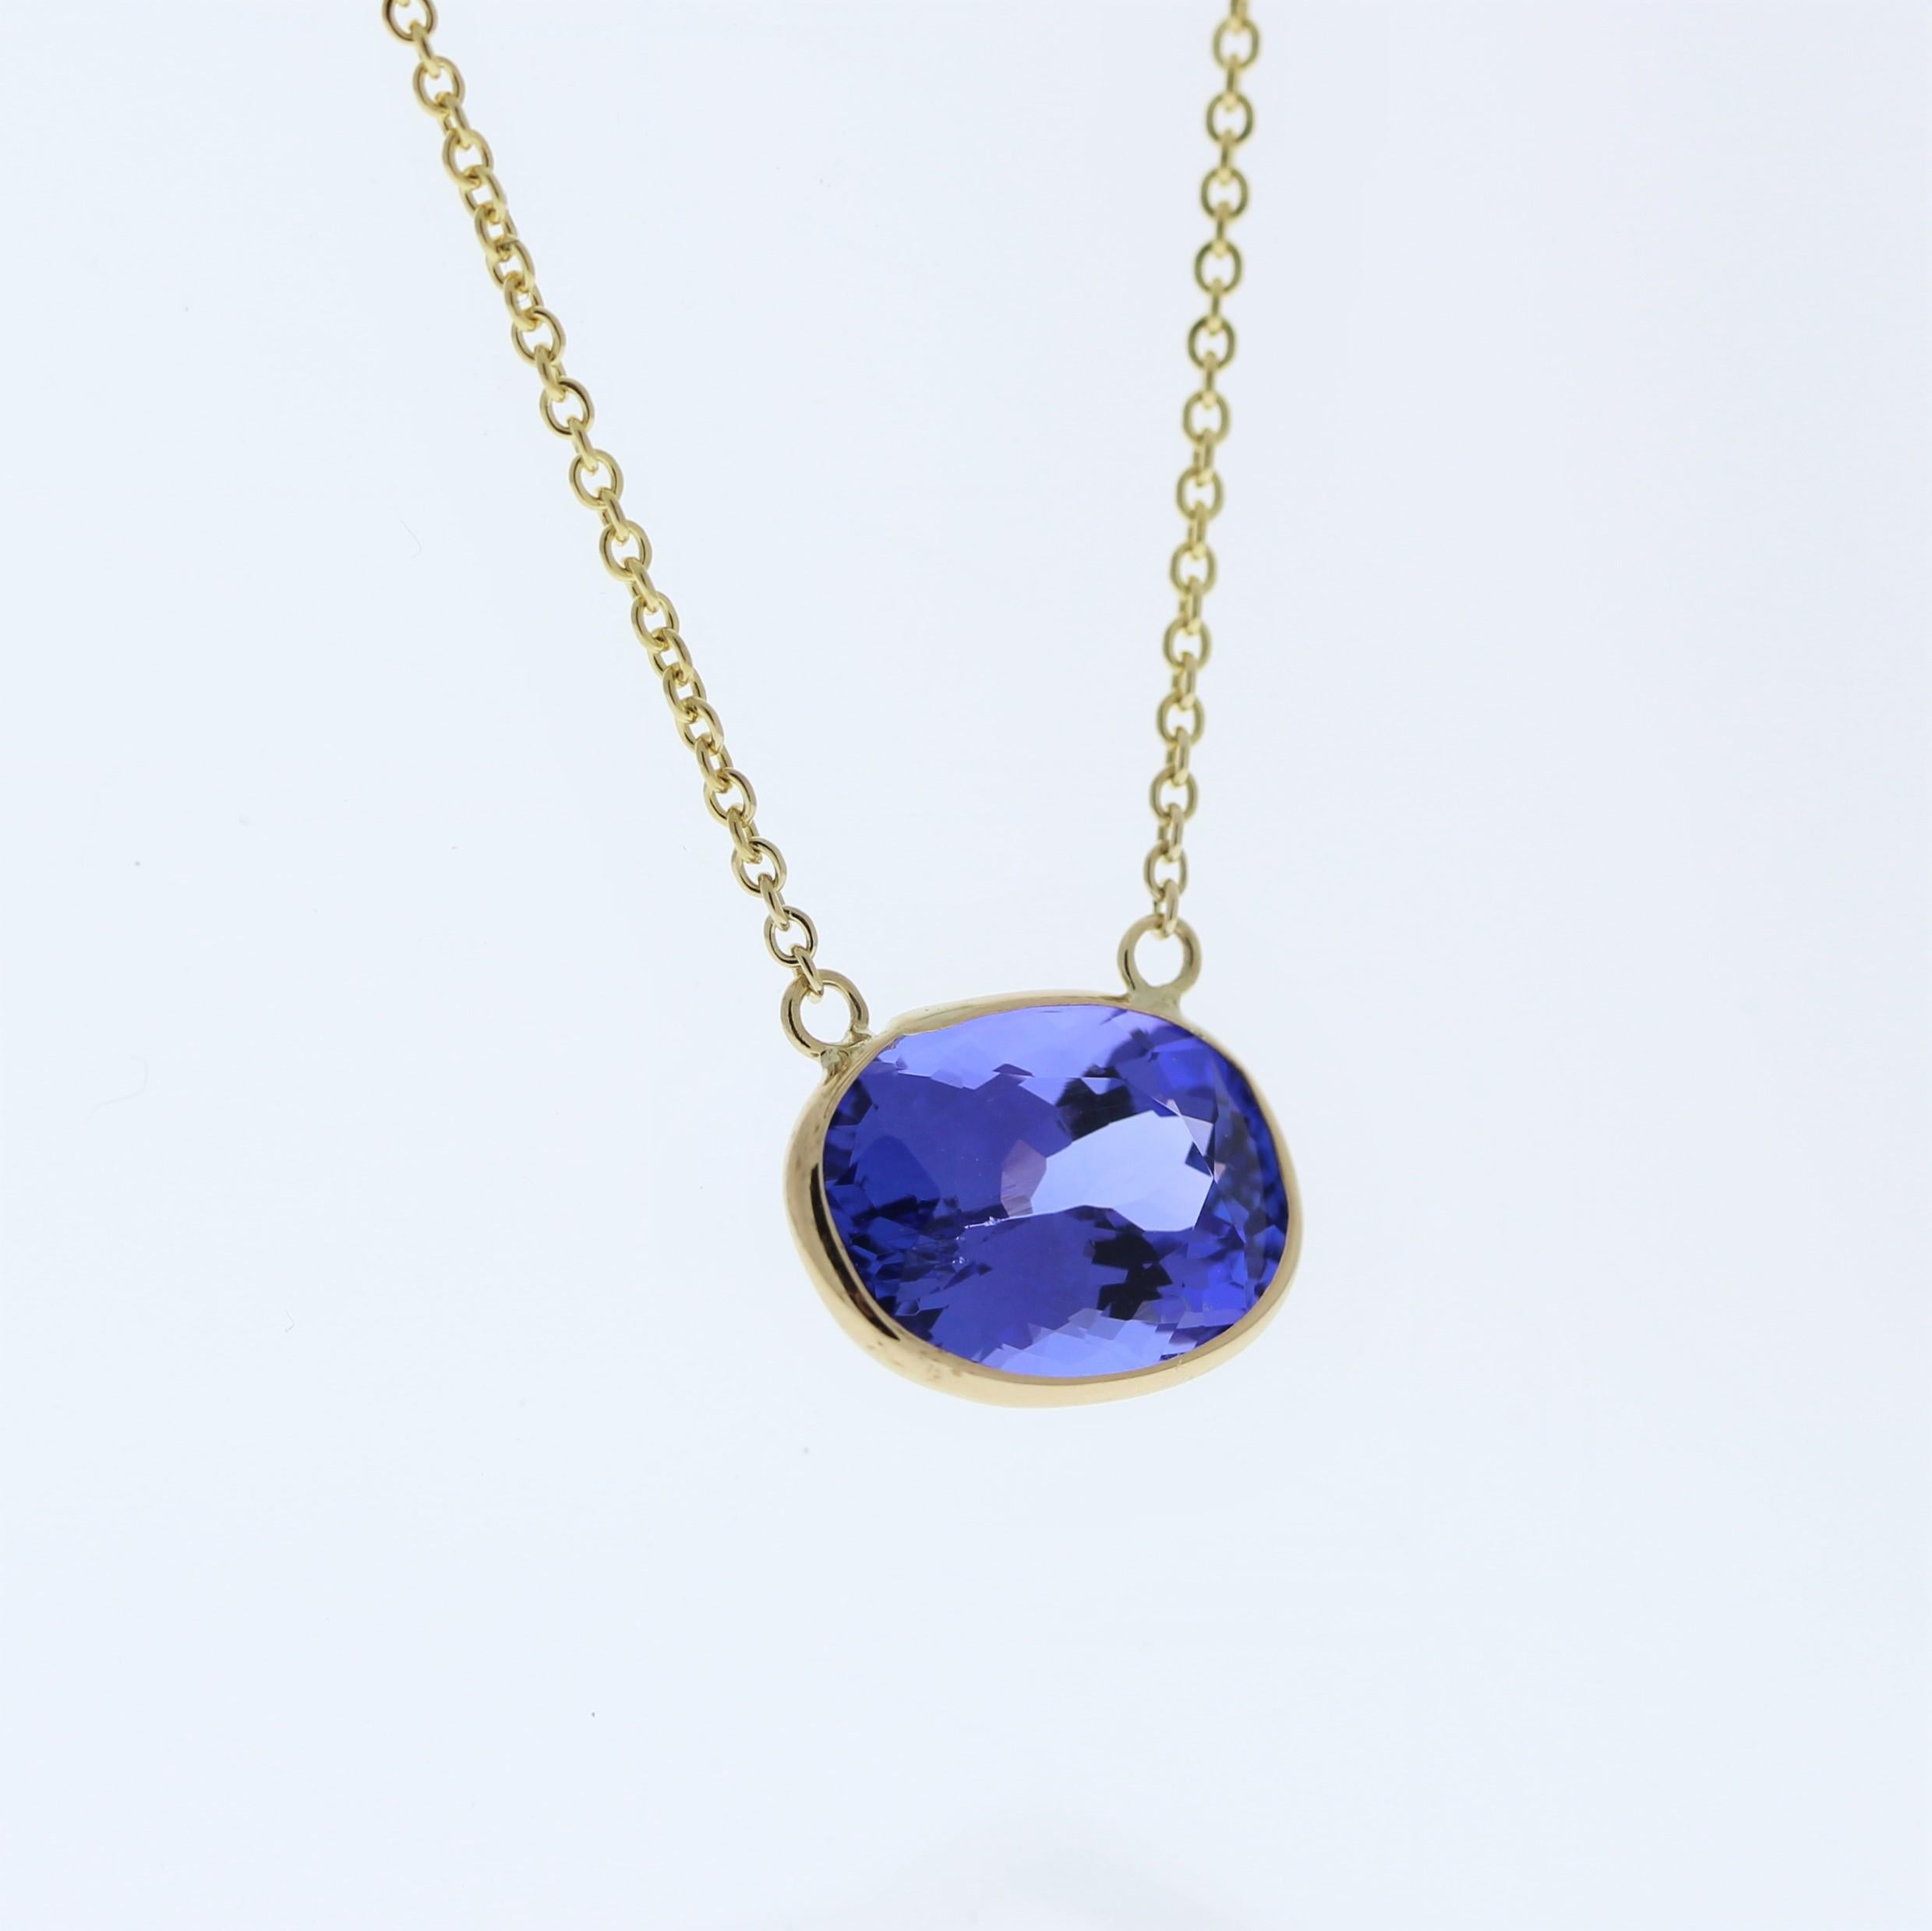 The necklace features a 4.20-carat oval-cut tanzanite set in a 14 karat yellow gold pendant or setting. The oval cut and the mesmerizing blue-violet color of the tanzanite against the yellow gold setting are likely to create a luxurious and